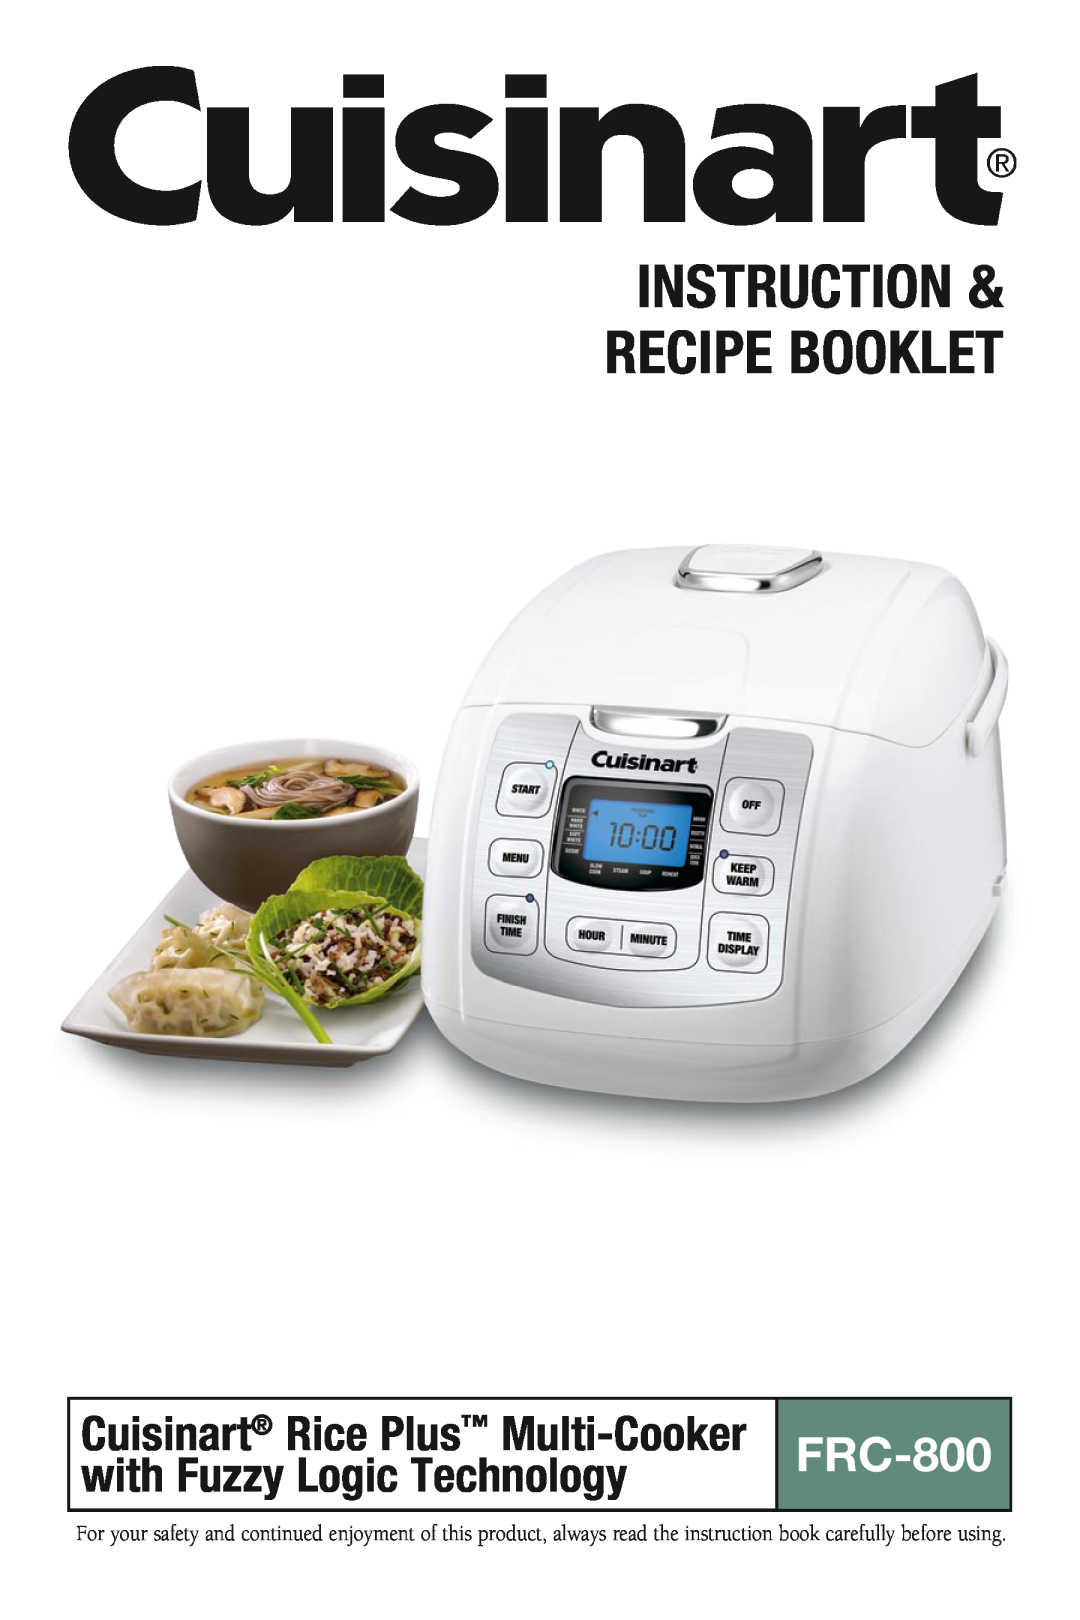 Cuisinart FRC-800 manual Instruction & Recipe Booklet, with Fuzzy Logic Technology, Cuisinart Rice Plus Multi-Cooker 